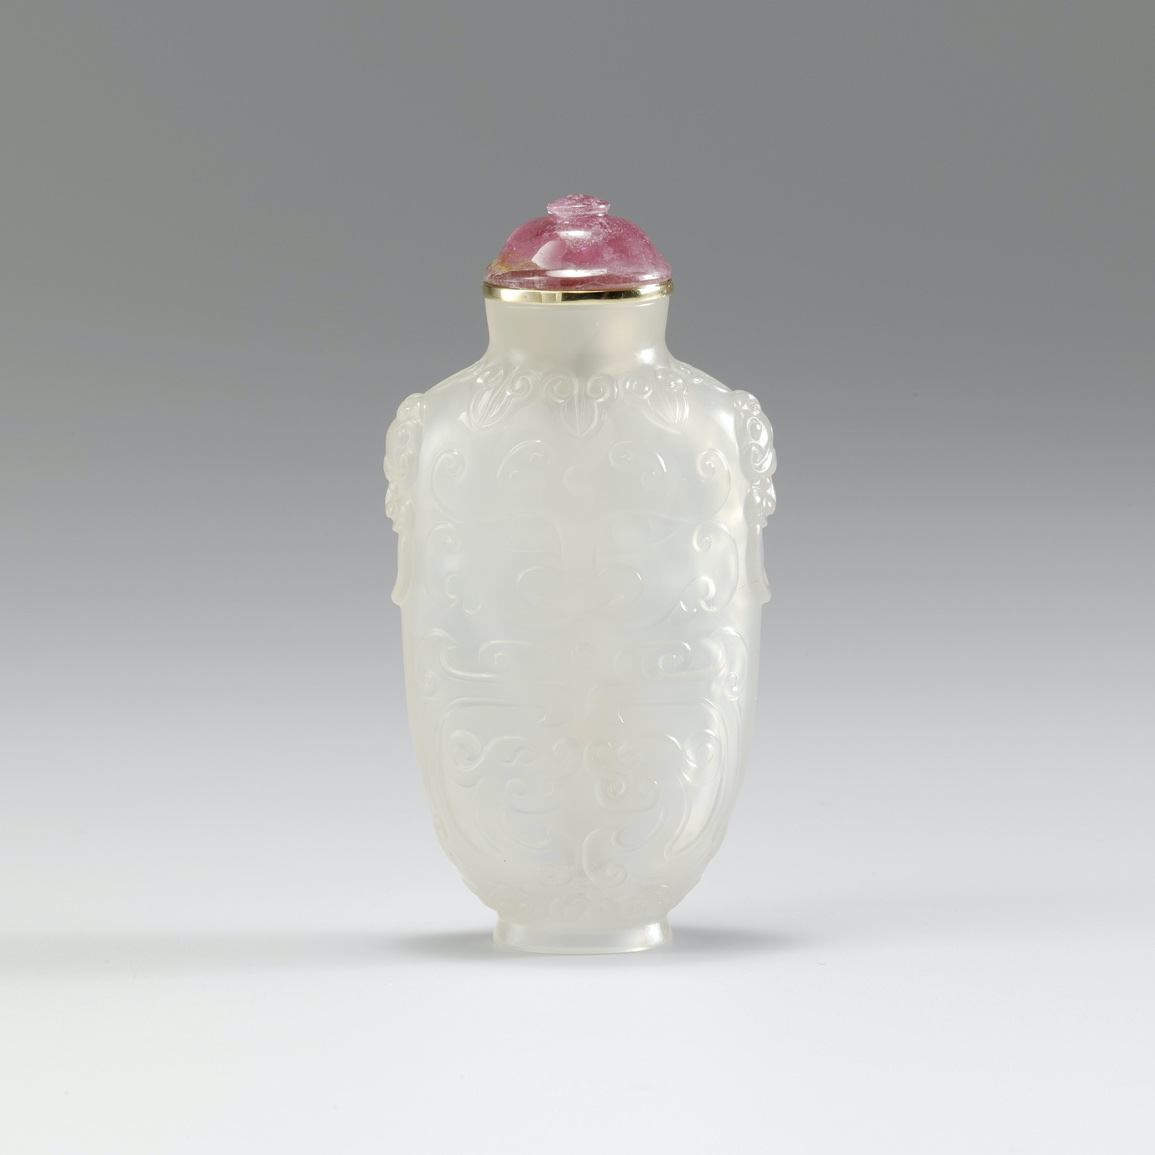 Pale chalcedony with archaic dragons, 1736-1795